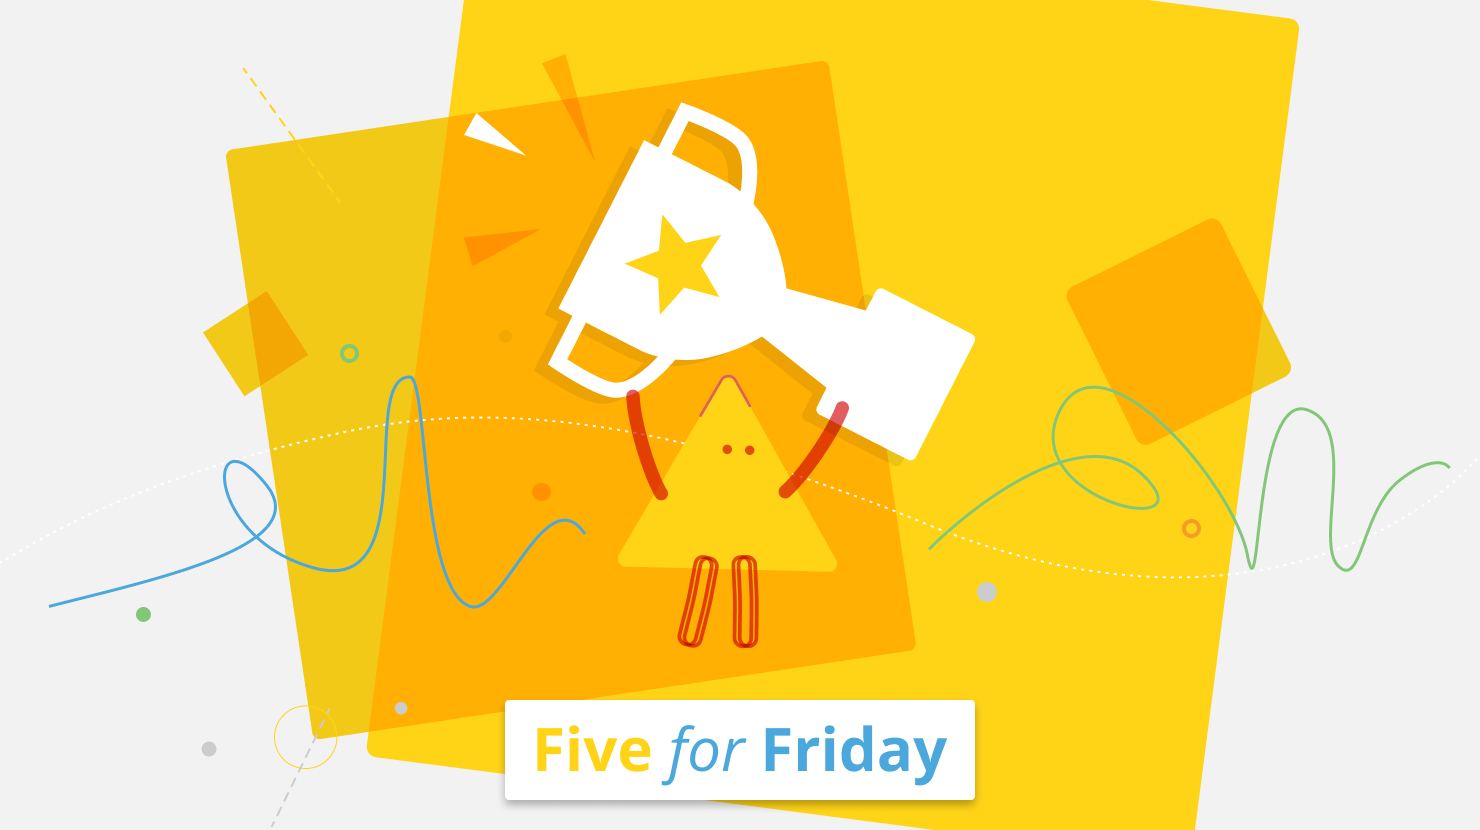 Five for Friday: Culture champions